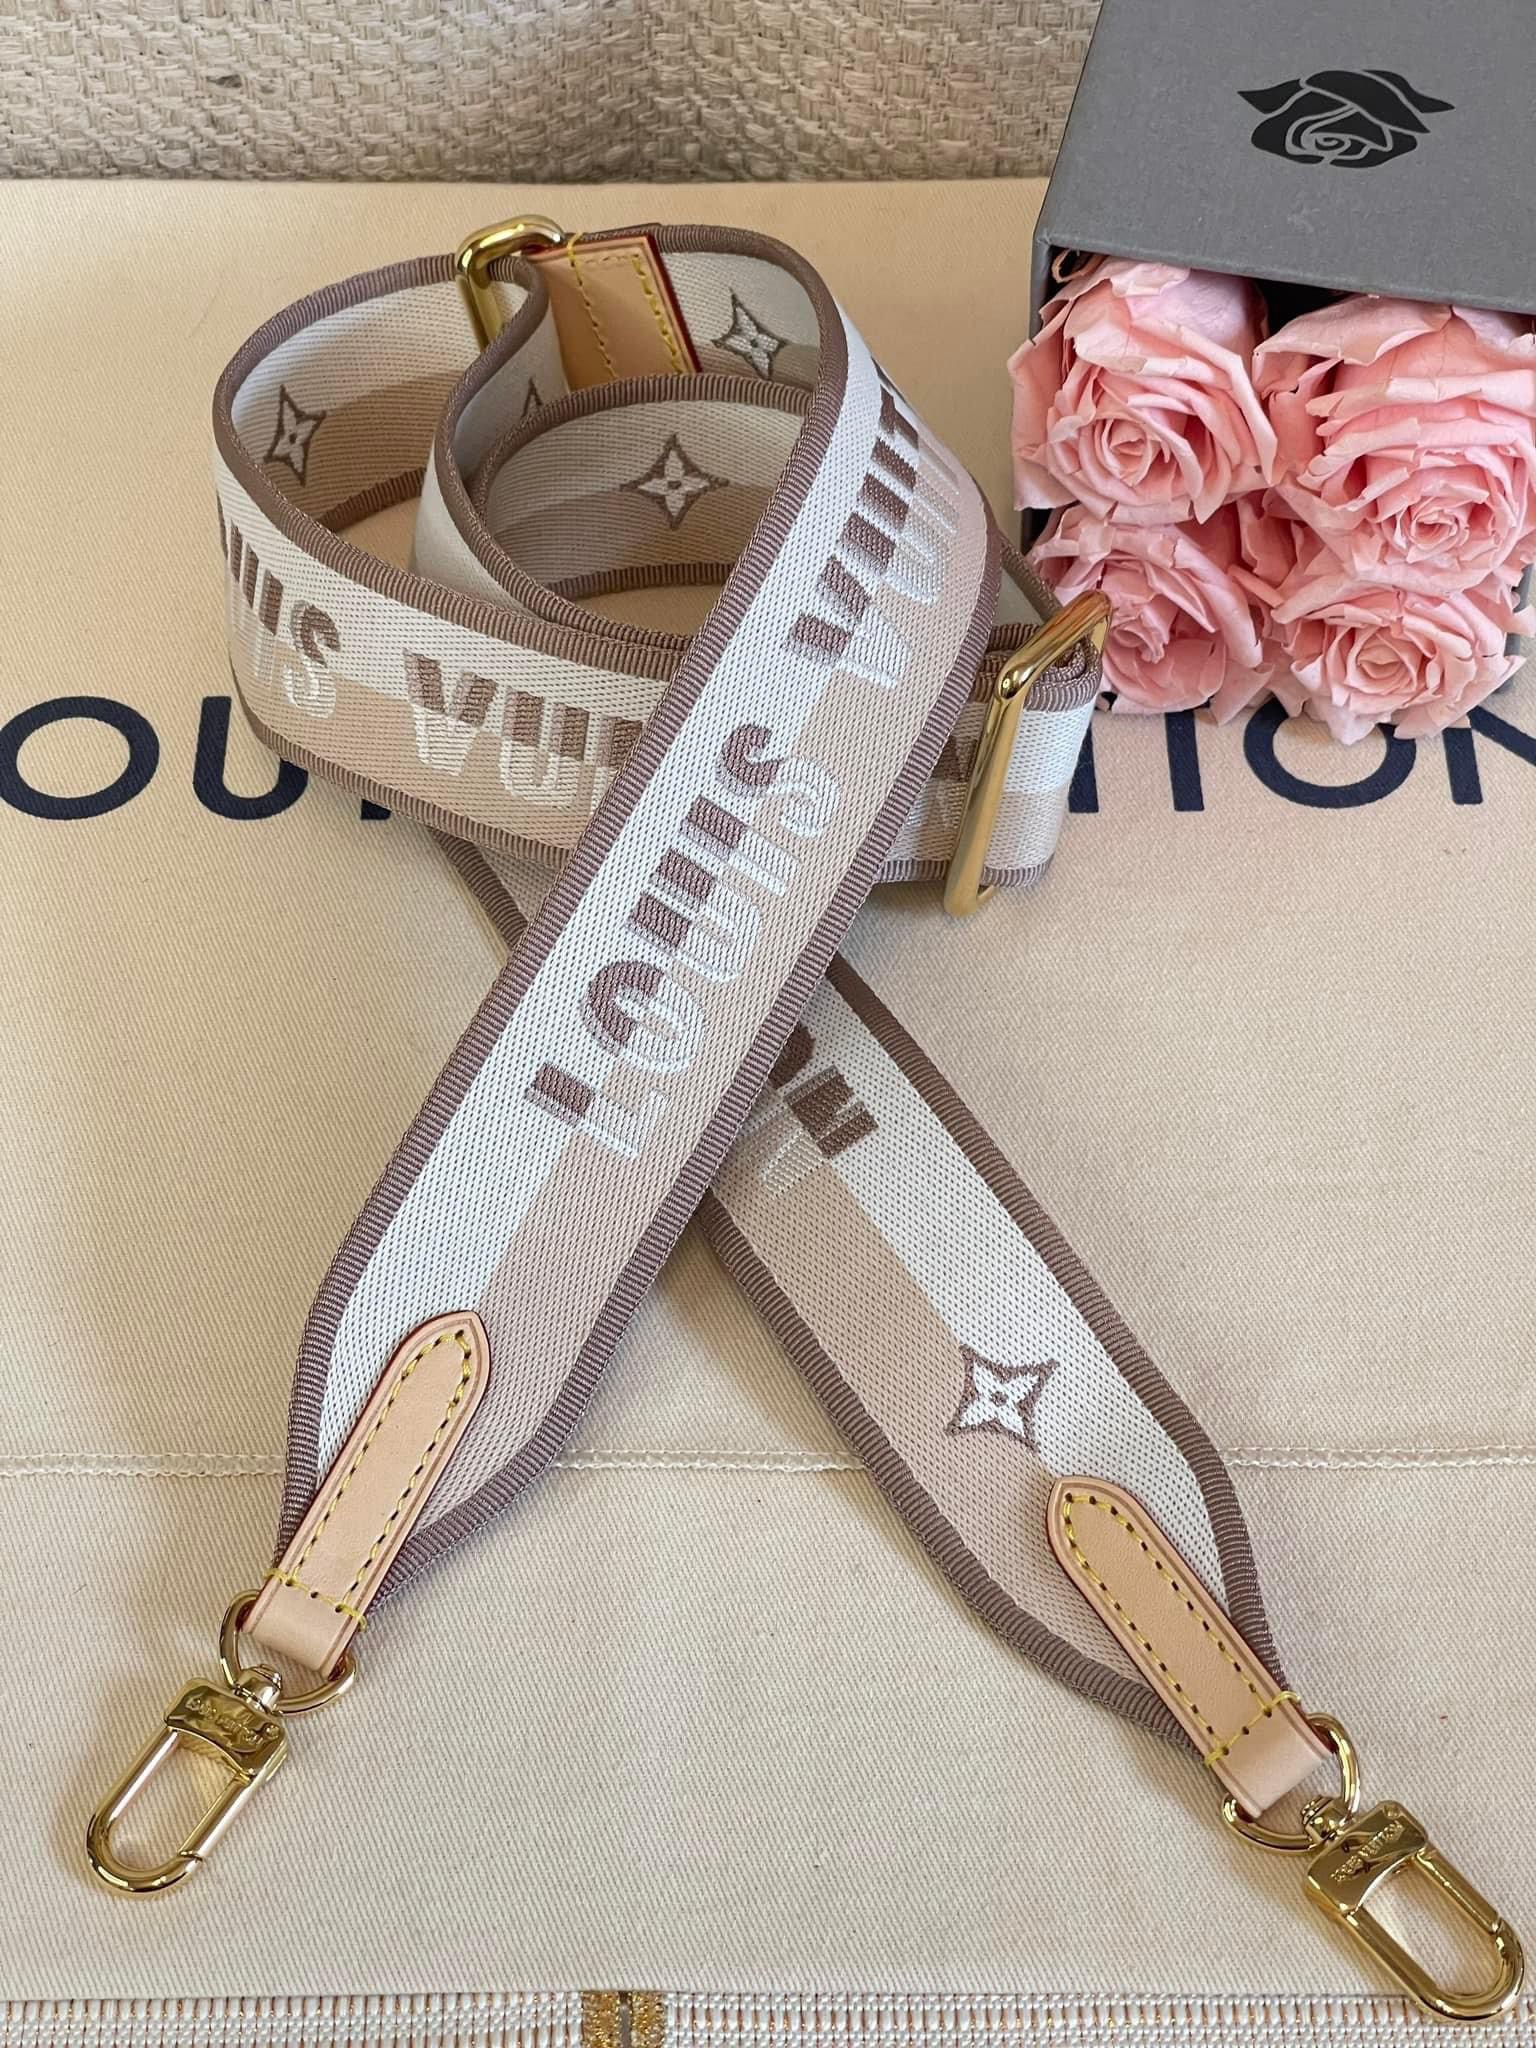 Authentic Louis Vuitton Strap for Sale in Peoria, AZ - OfferUp